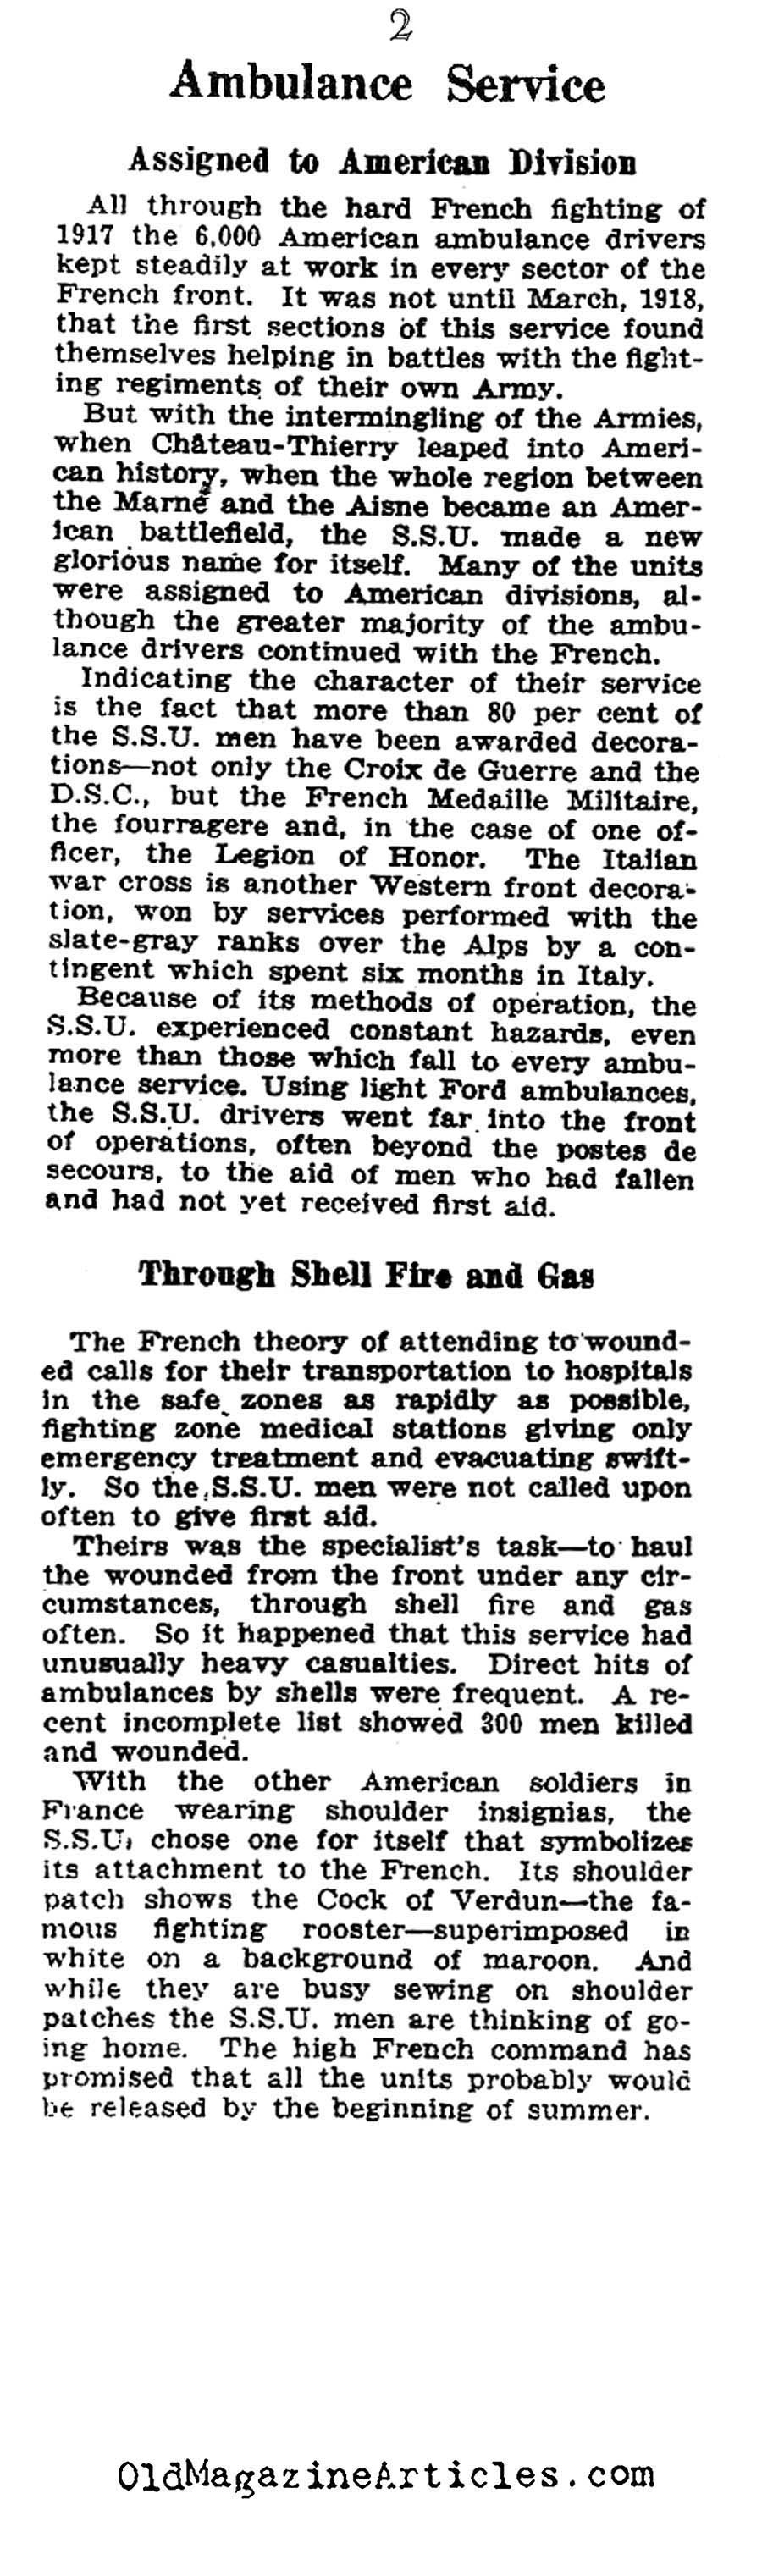 American Ambulance Volunteers in the Service of France (The Stars and Stripes, 1919)